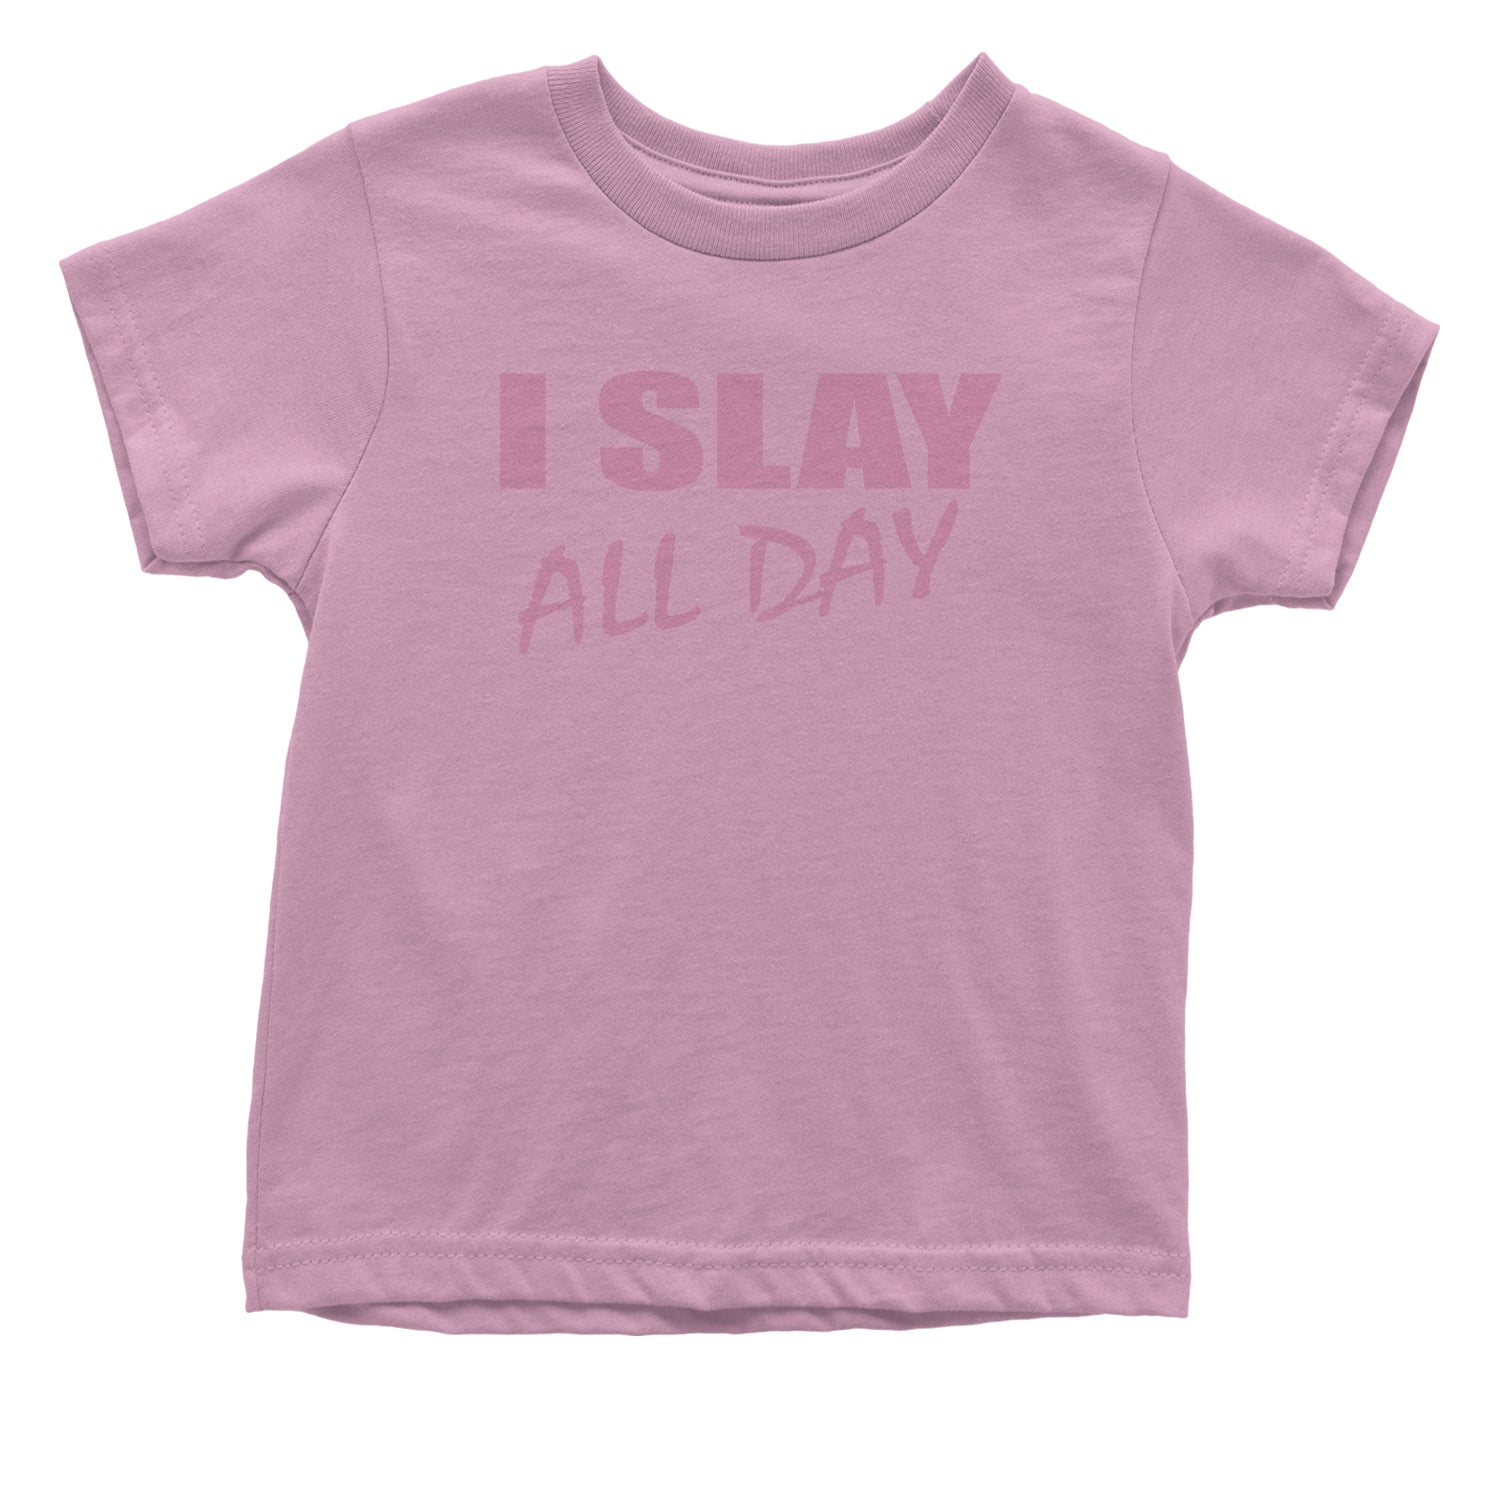 I Slay All Day Toddler T-Shirt all, beyhive, day, formation, slay by Expression Tees